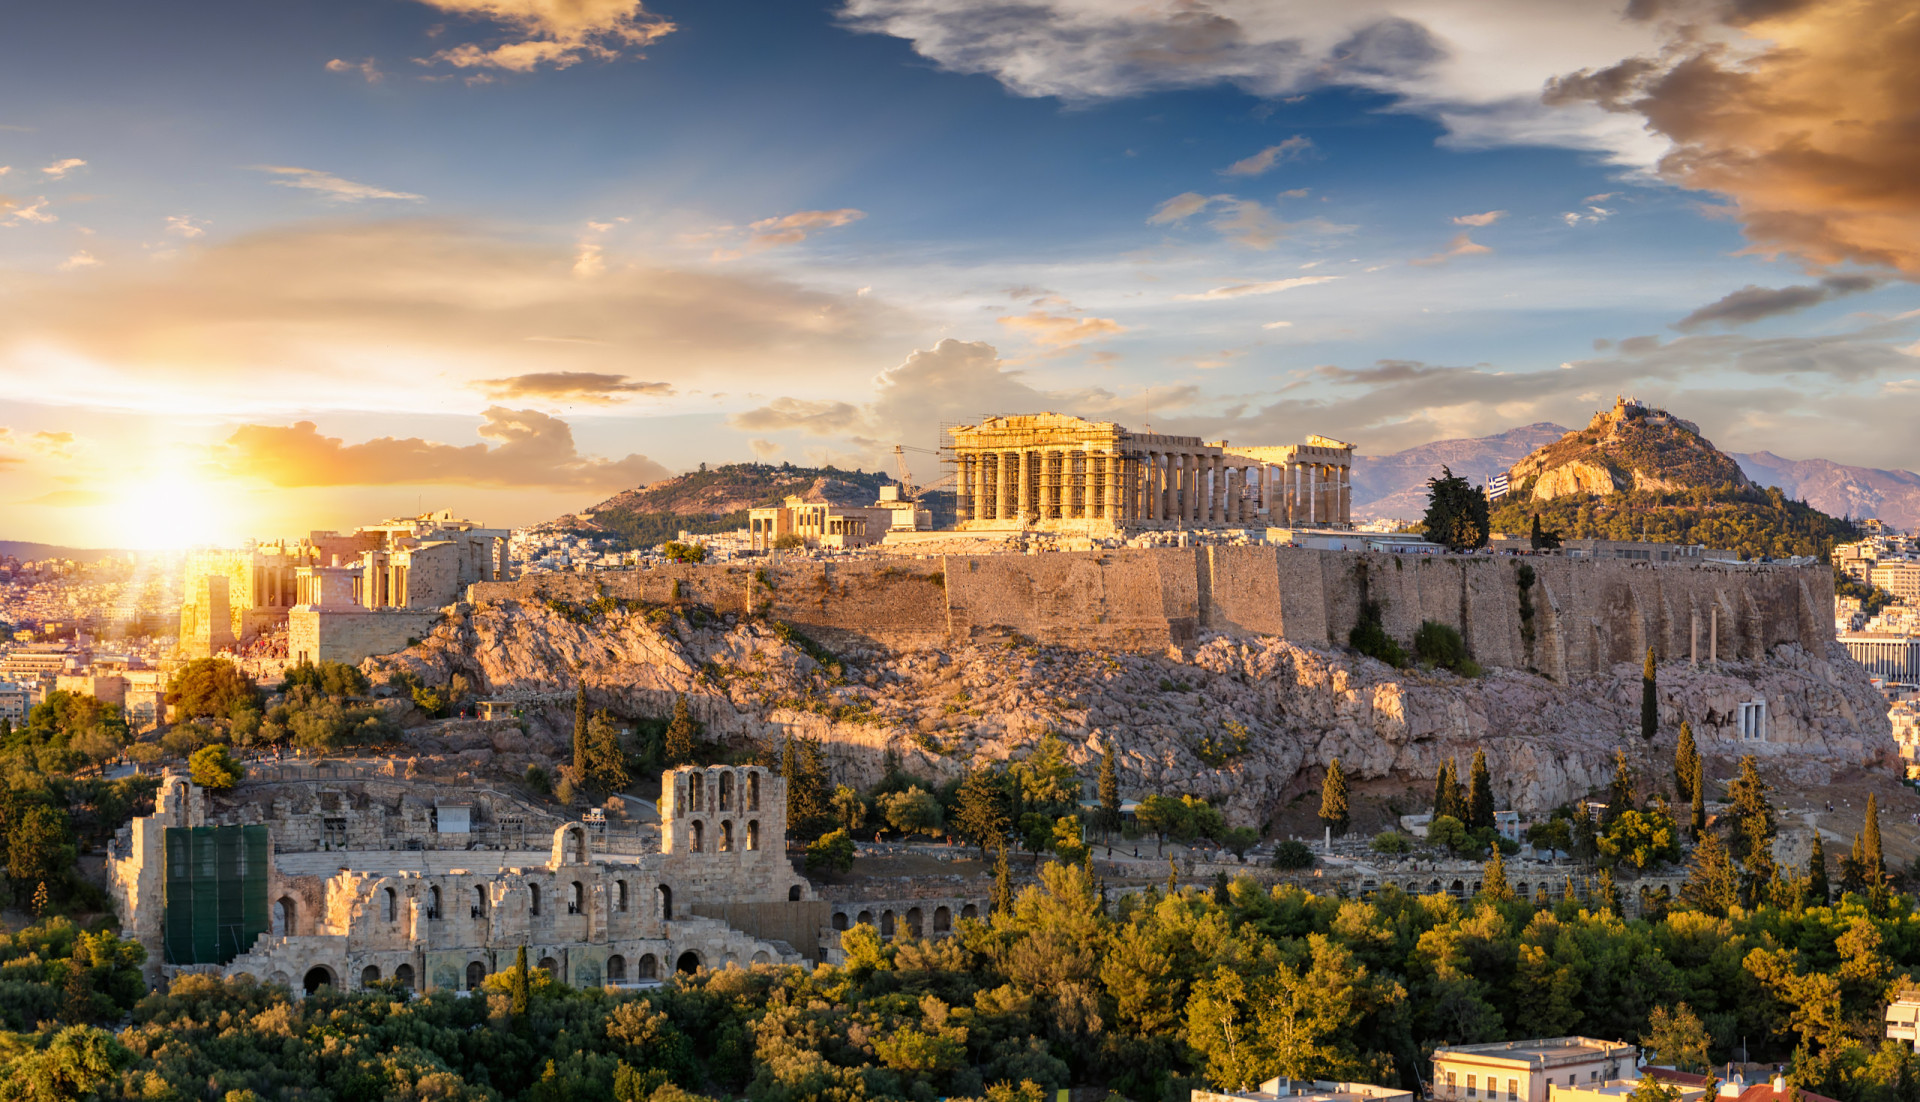 <p><span>The Acropolis of Athens, with its ancient ruins and stunning views, is a must-visit destination. However, its popularity with tourists makes it a target for thieves, so keep a close eye on your belongings, especially in crowded areas.</span></p><p><a href="https://www.msn.com/en-us/community/channel/vid-7xx8mnucu55yw63we9va2gwr7uihbxwc68fxqp25x6tg4ftibpra?cvid=94631541bc0f4f89bfd59158d696ad7e">Follow us and access great exclusive content every day</a></p>